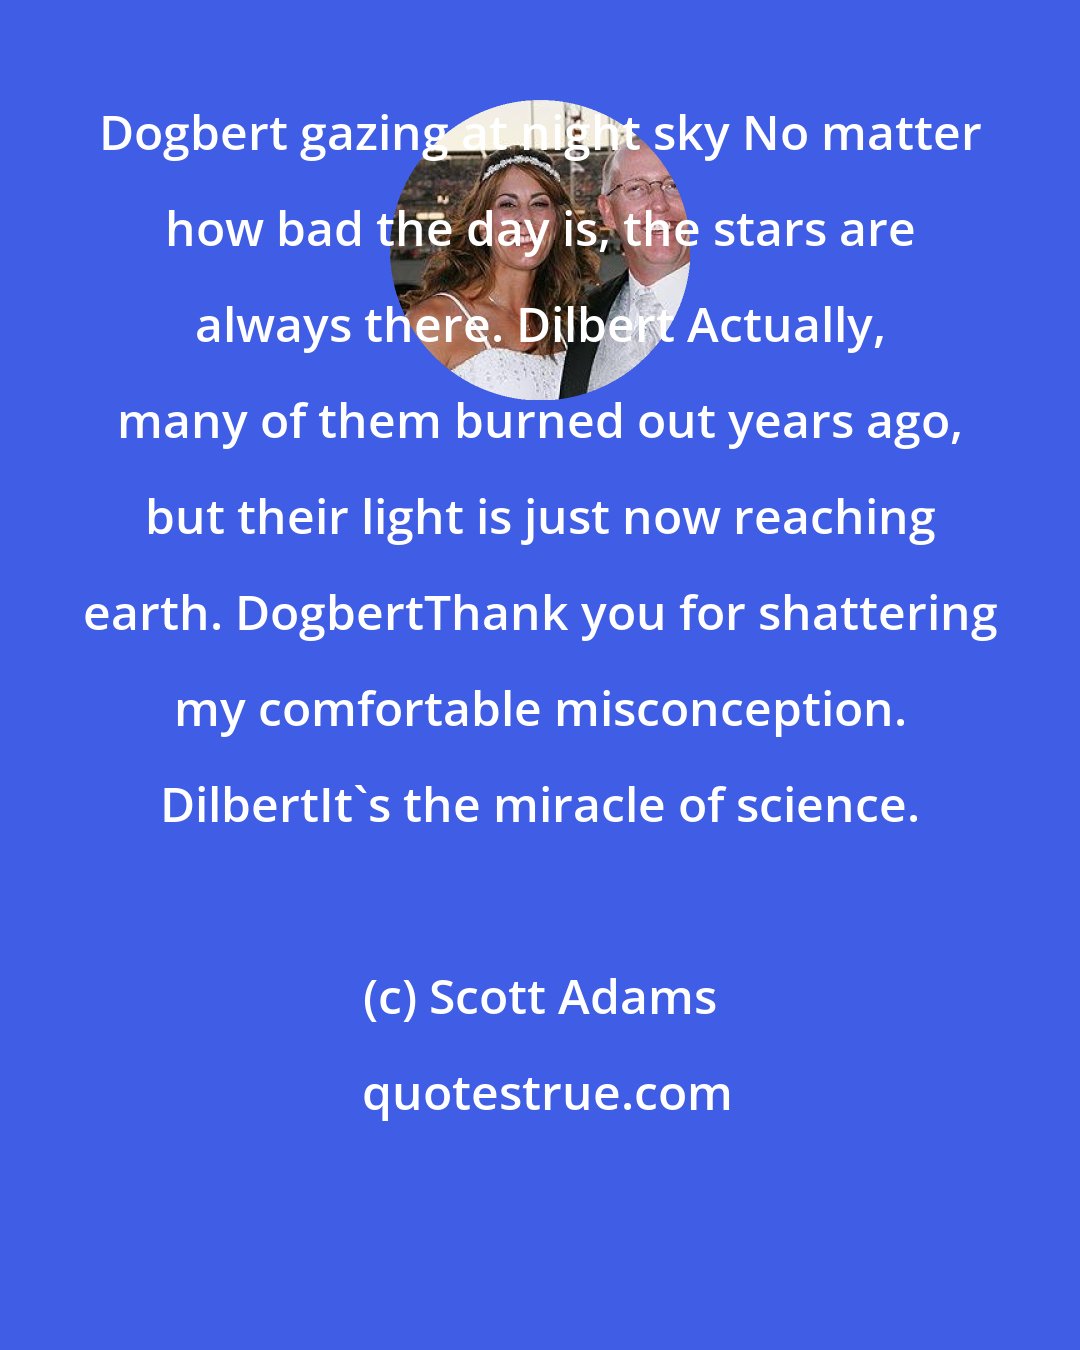 Scott Adams: Dogbert gazing at night sky No matter how bad the day is, the stars are always there. Dilbert Actually, many of them burned out years ago, but their light is just now reaching earth. DogbertThank you for shattering my comfortable misconception. DilbertIt's the miracle of science.